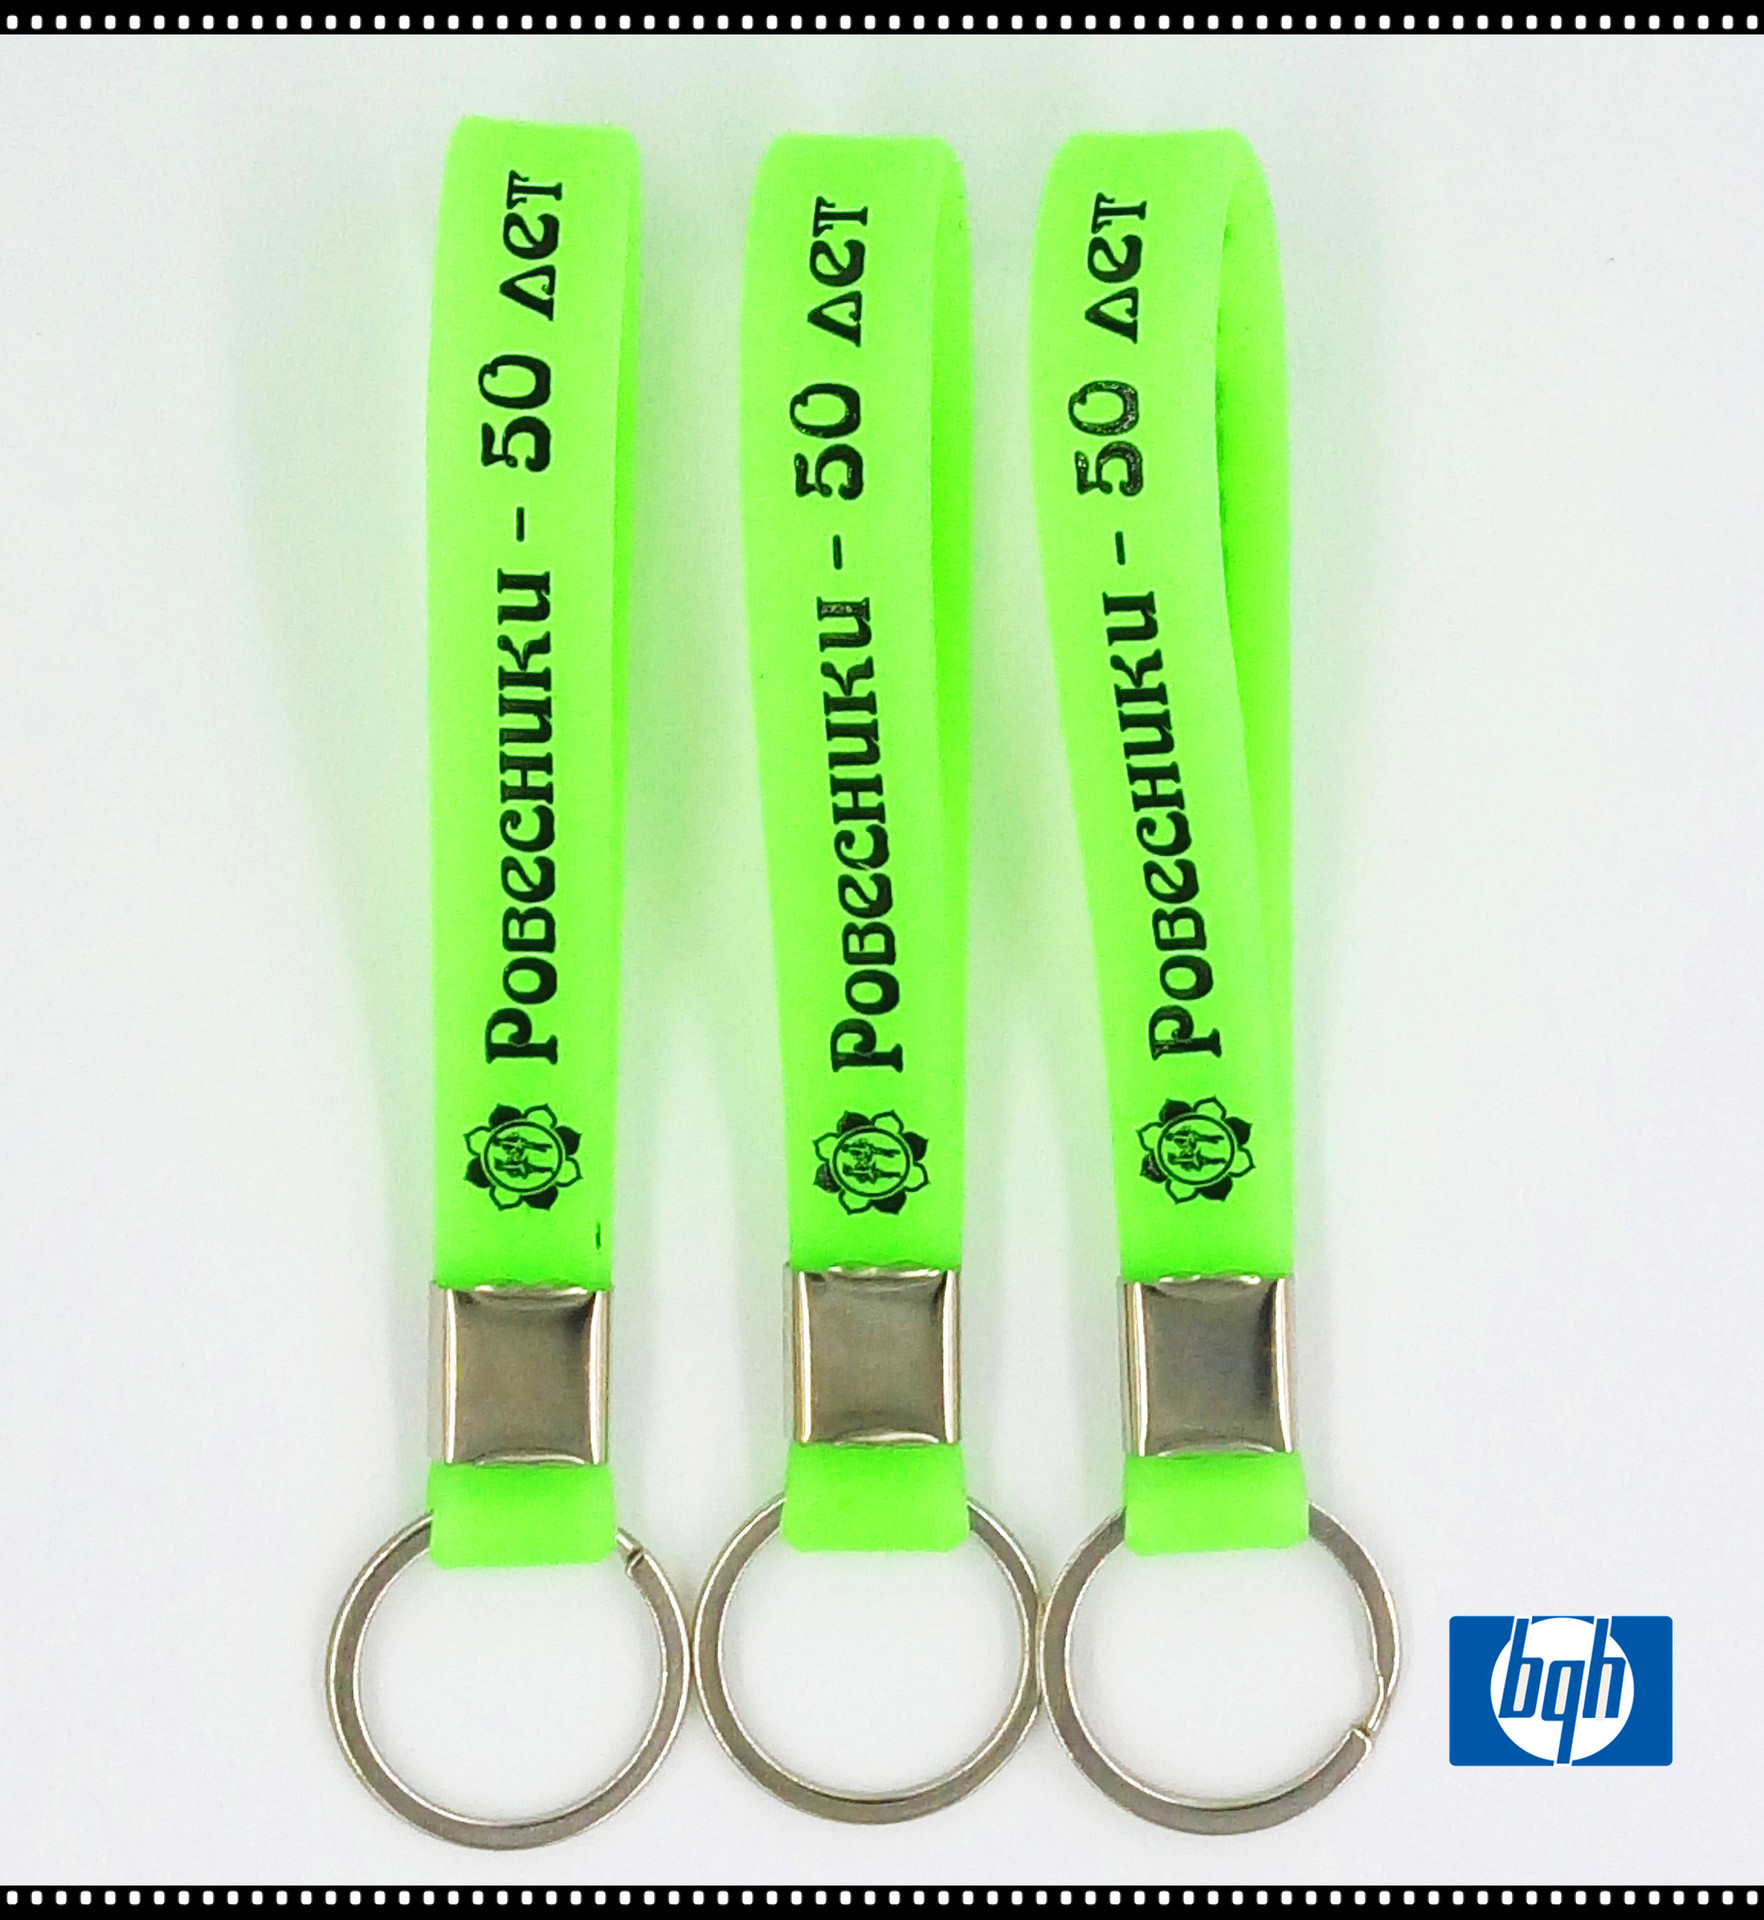 Luminous Silicone Key Chain Printing Lettering Rubber Wrist Band Key Chain Fluorescent Silicone Key Ring Accessories Pendant